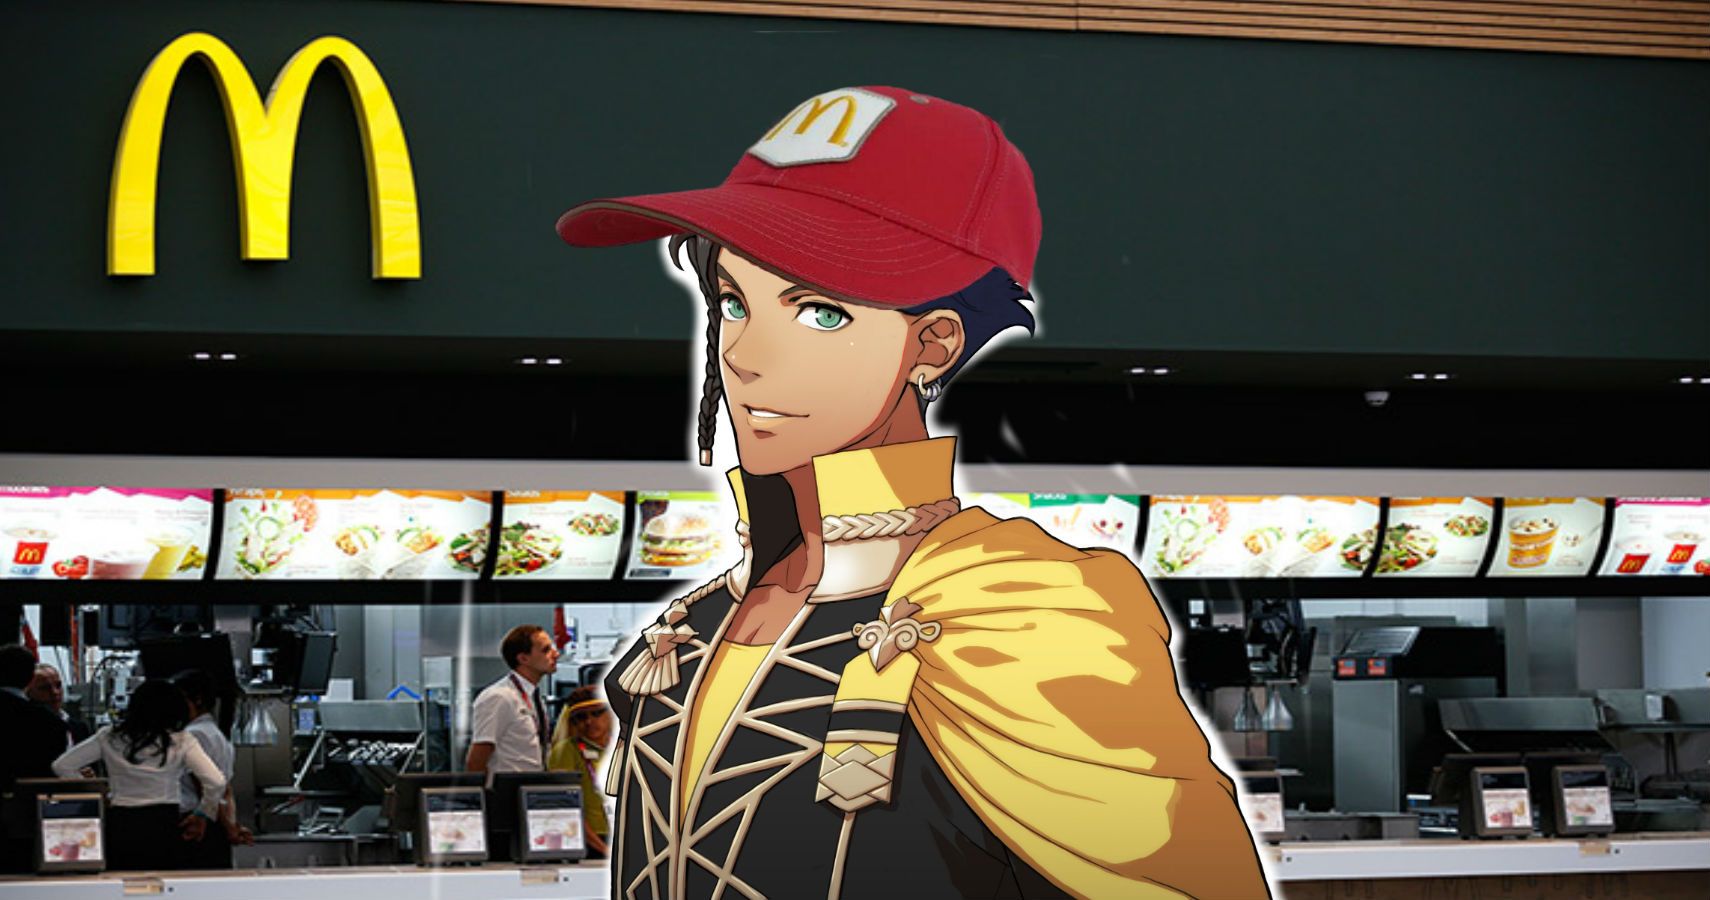 Fire Emblems Claude Now Works For McDonalds Thanks To Fan Edit